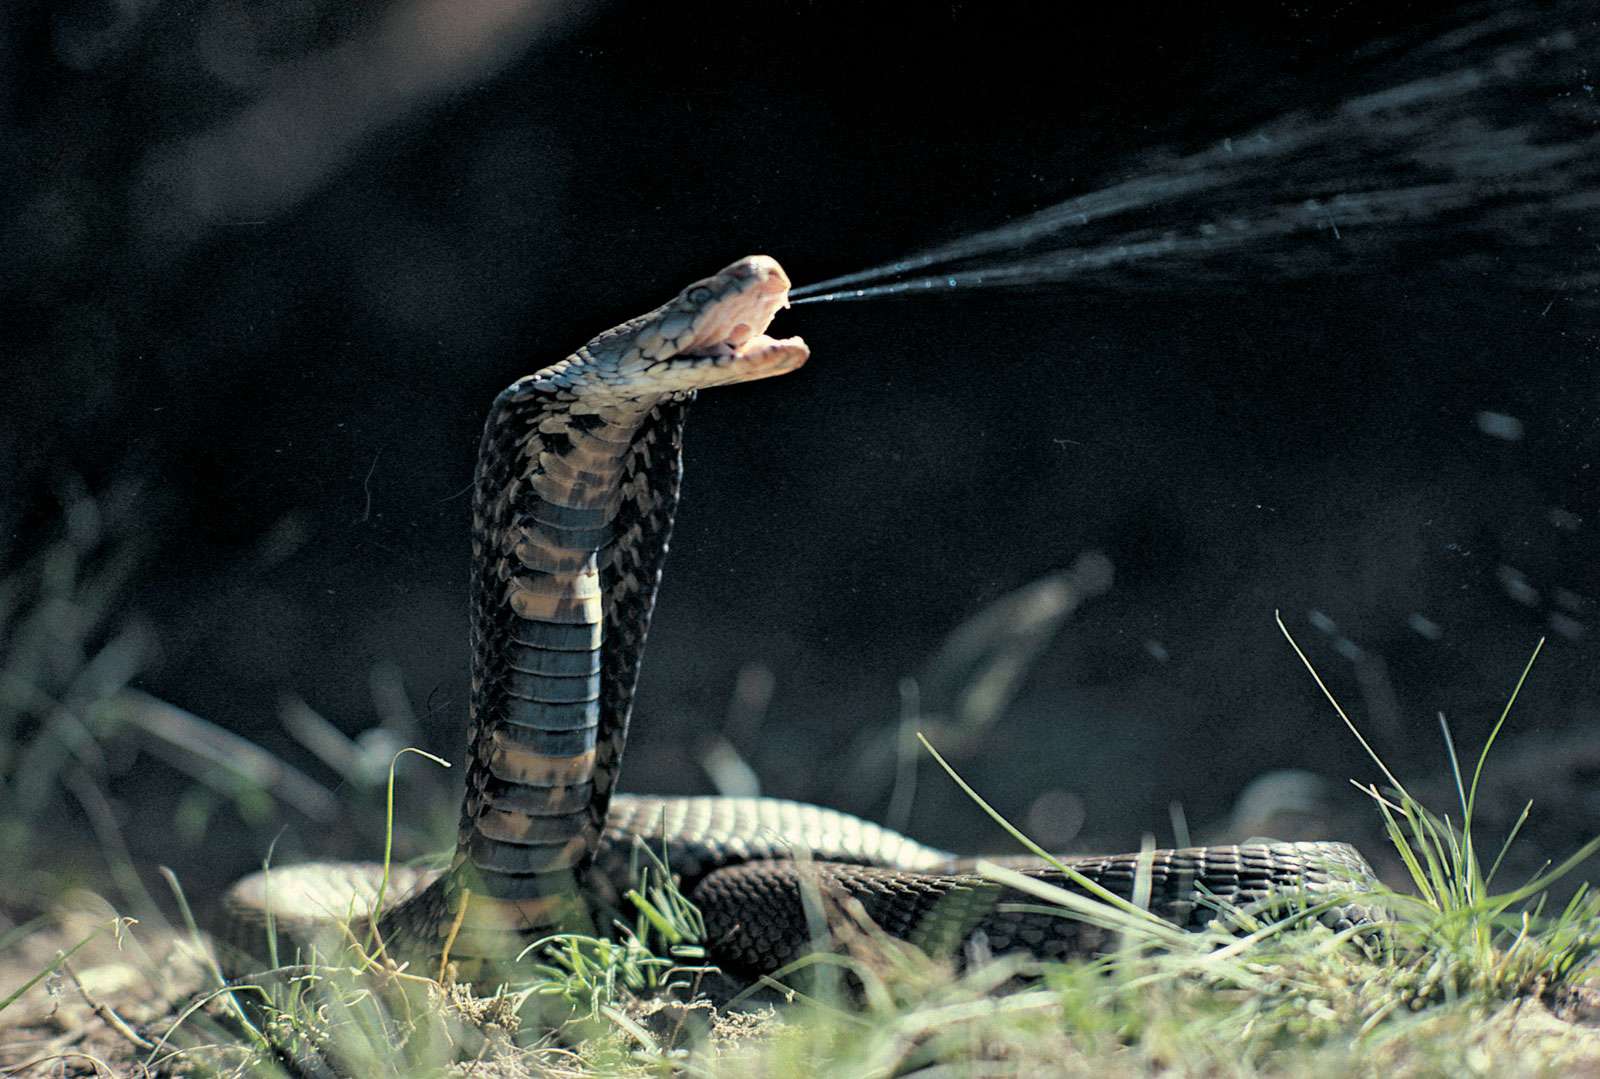 What is the deadliest poisonous snake in the world?